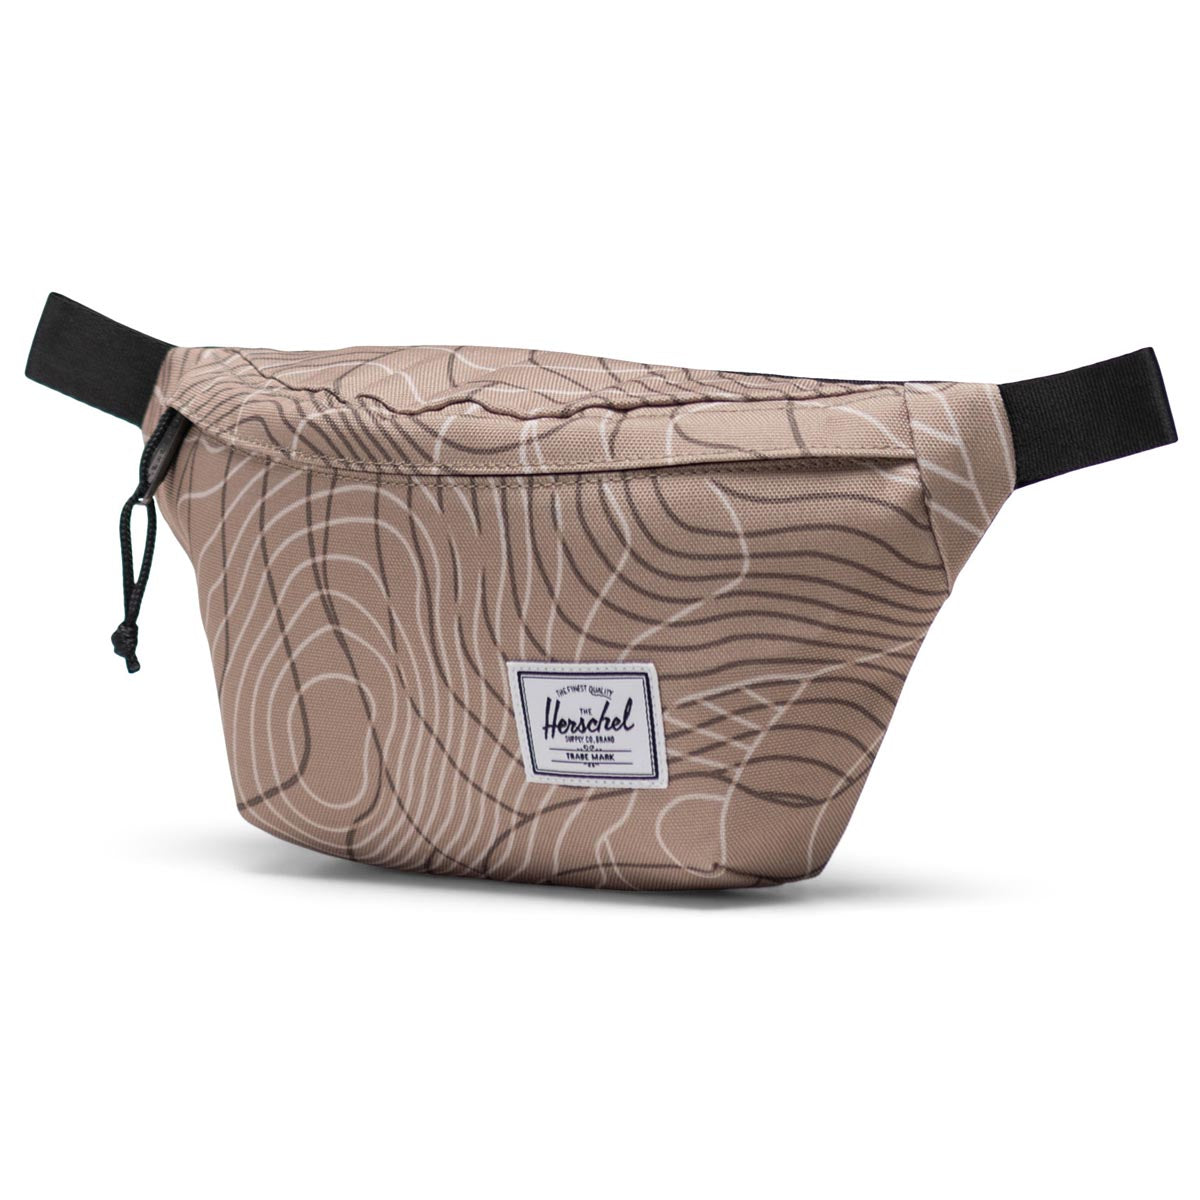 Herschel Supply Classic Hip Bag - Twill Topography image 3